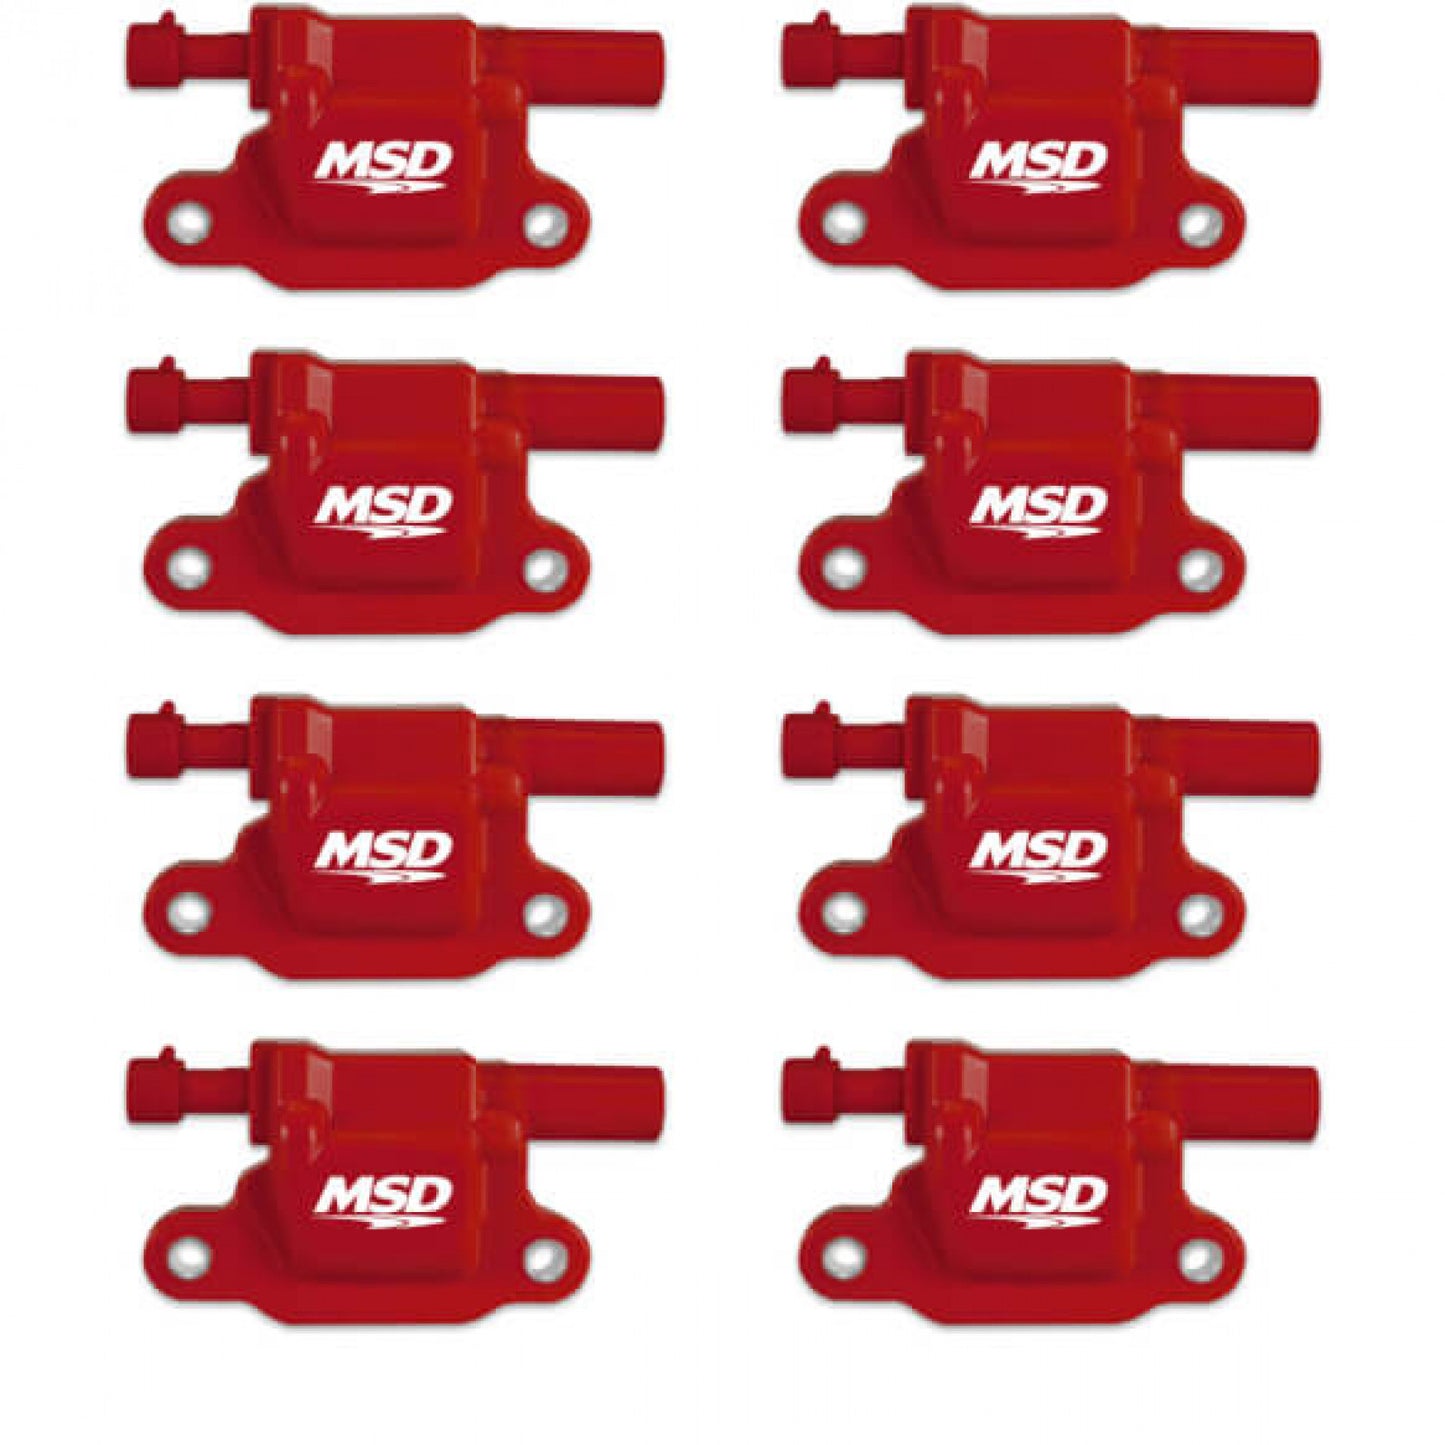 MSD DIS Direct Ignition System Kit - Red '60151